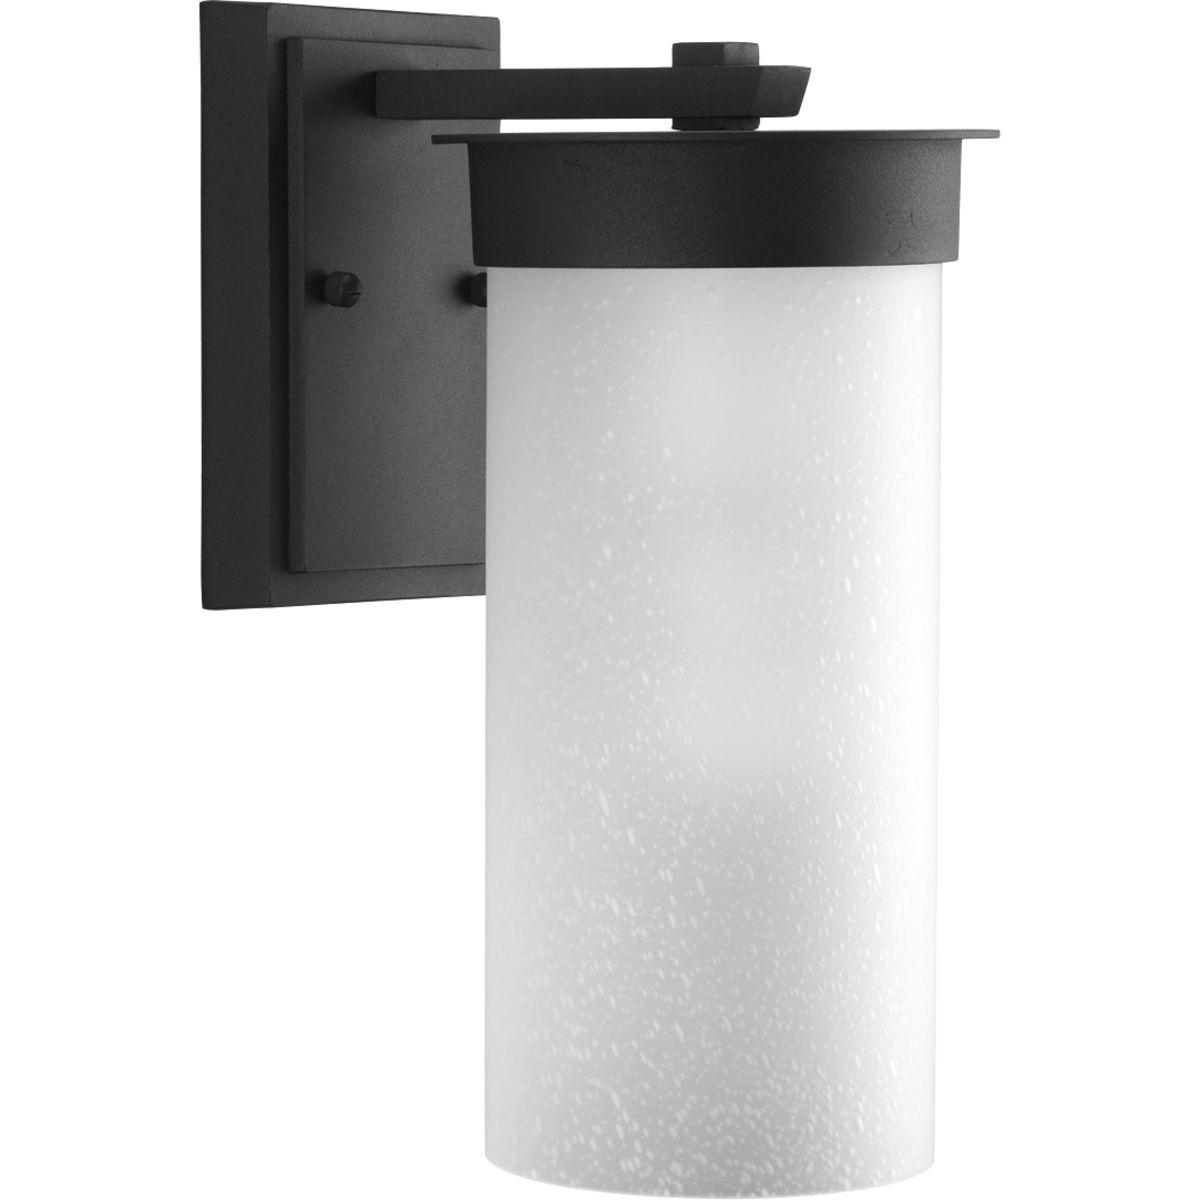 Hubbell P5625-31 The Hawthorn outdoor lantern collection takes a modern approach to the popular Prairie design style. One-light medium cast aluminum lantern in a Black finish with etched seeded glass.  ; Takes a modern approach to the popular Prairie design style. ; Black